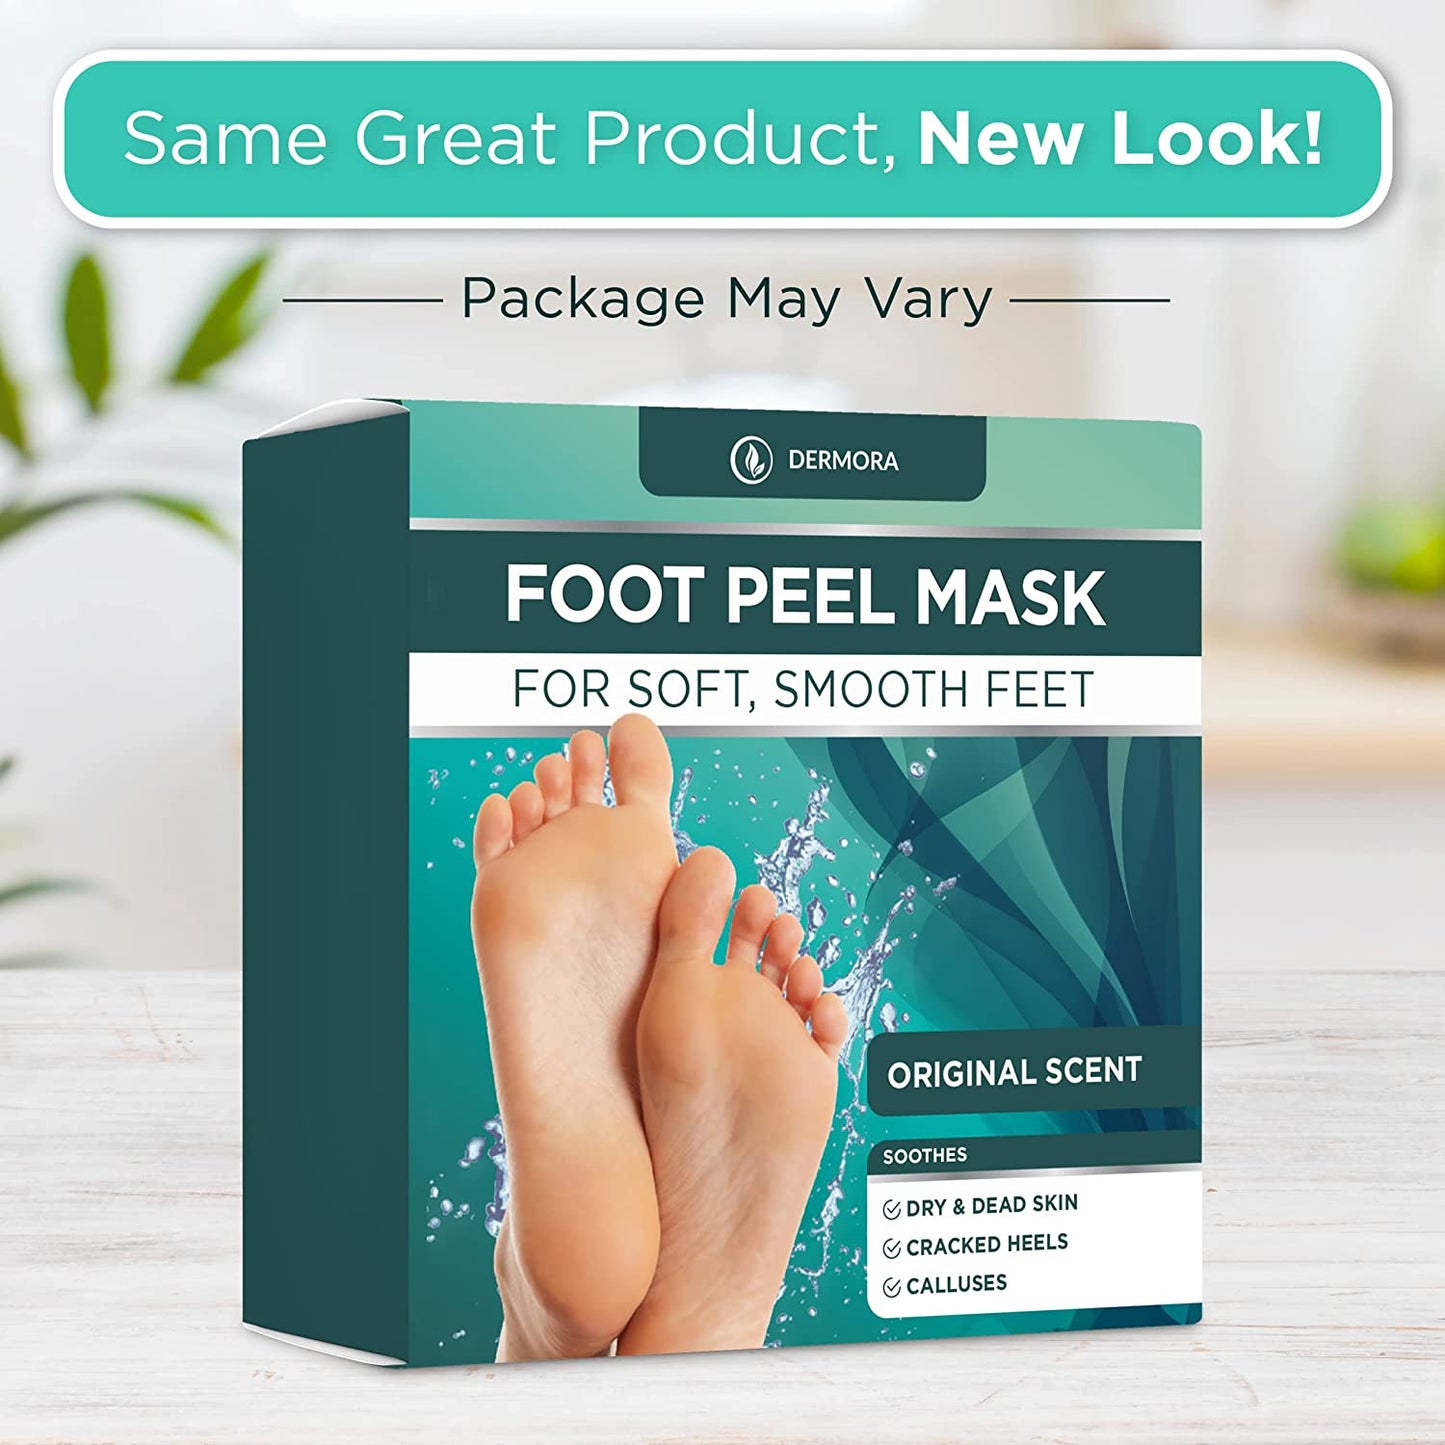 Foot Peel Mask - 2 Pack of Regular Size Skin Exfoliating Foot Masks for Dry, Cracked Feet, Callus, Dead Skin Remover - Feet Peeling Mask for Baby Soft Feet, Original Scent